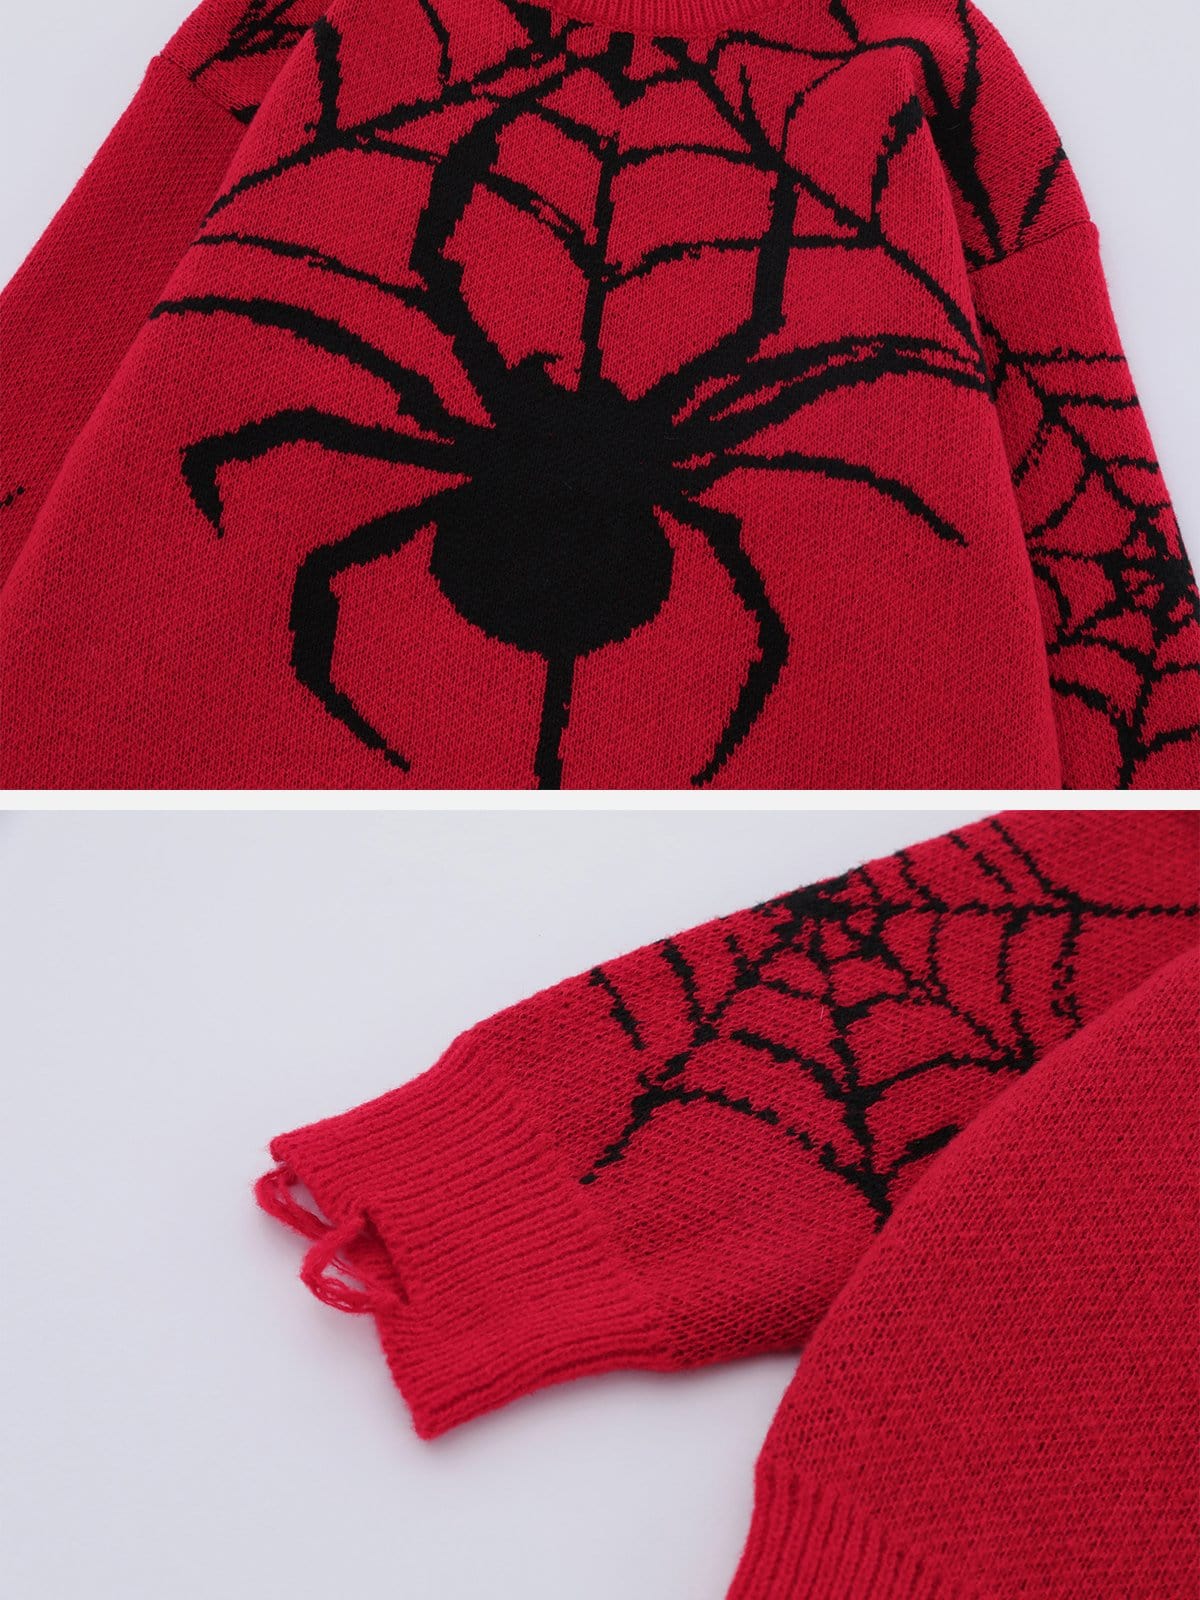 NEV Distressed Spider Sweater